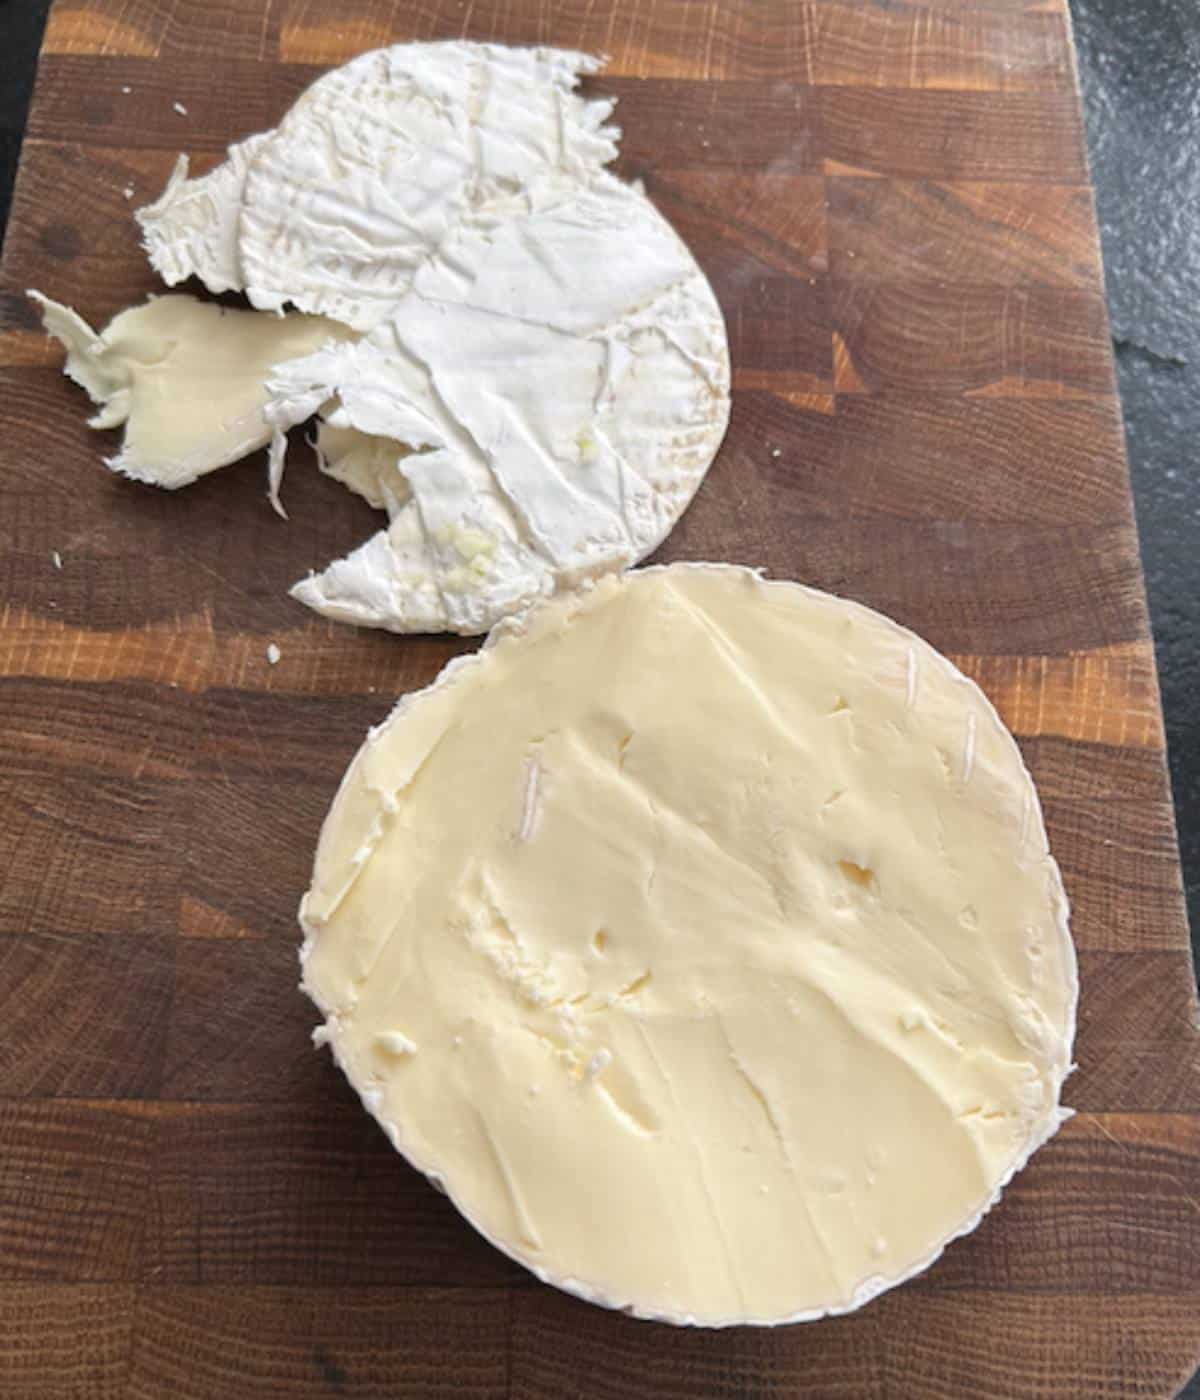 Rind shaved off top of brie.